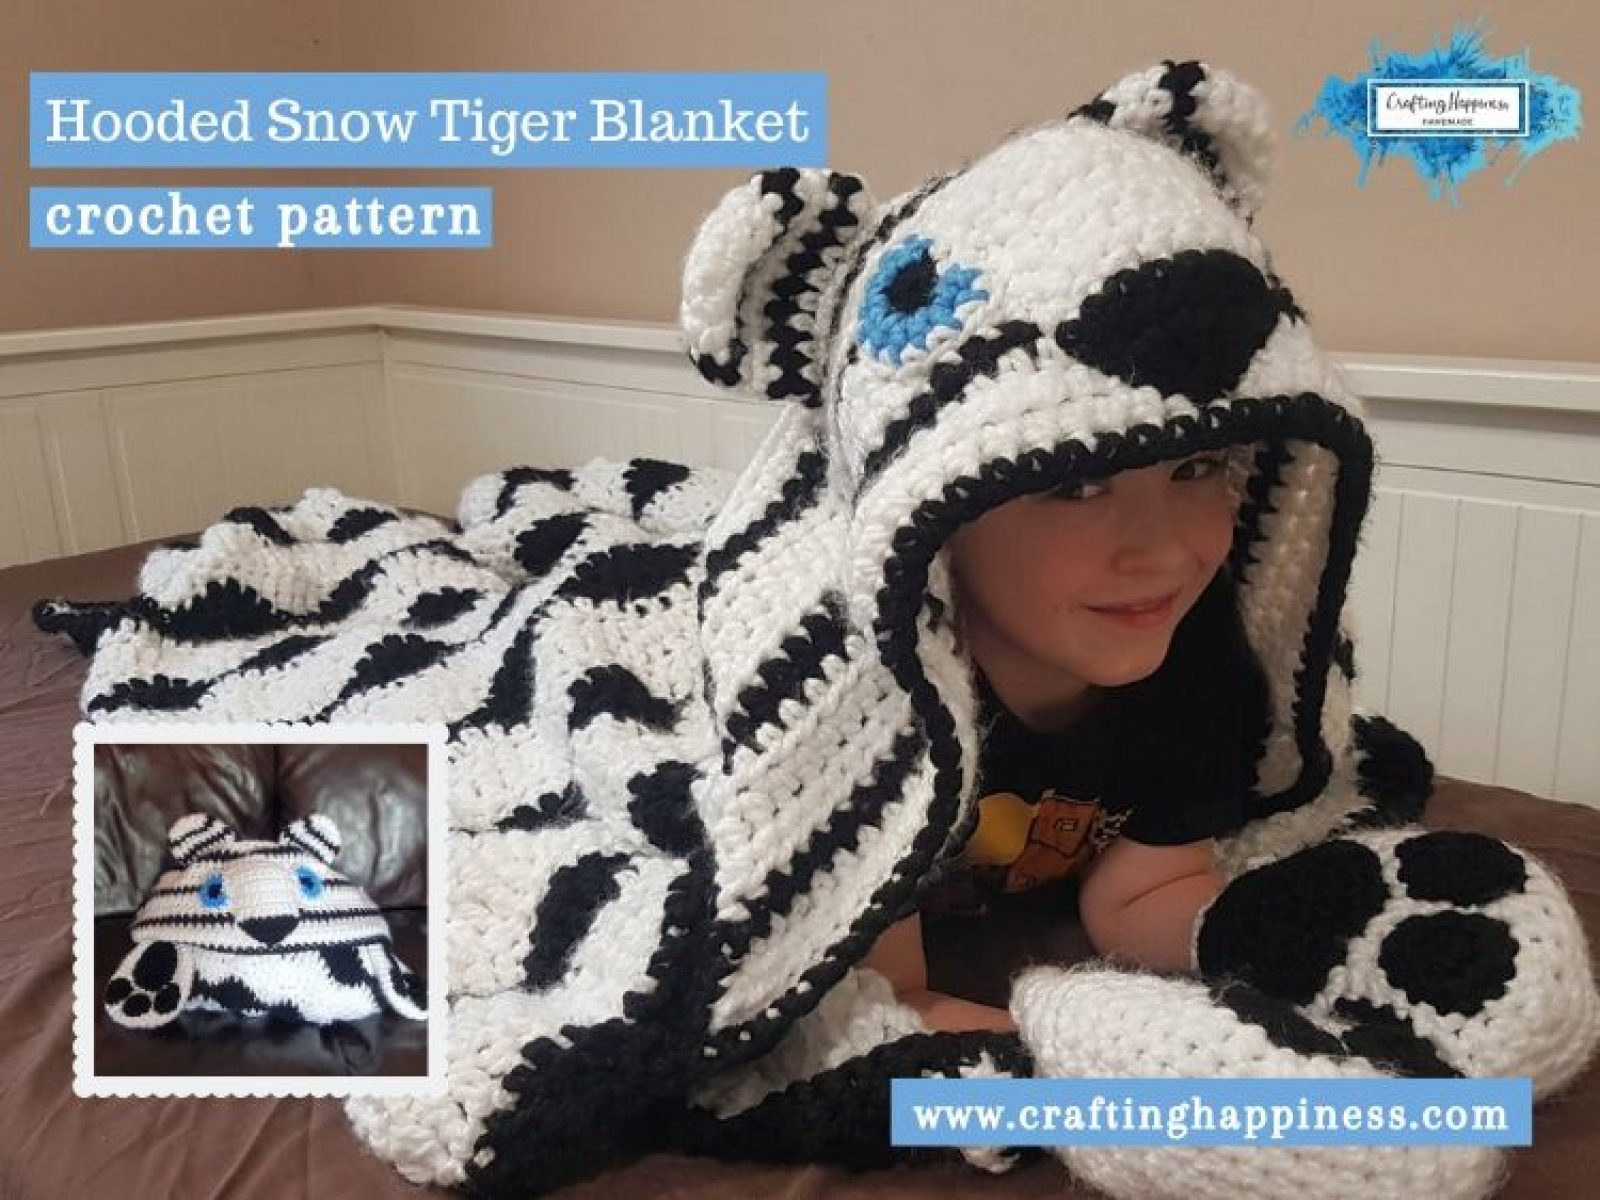 Hooded Snow Tiger Blanket by Crafting Happiness FACEBOOK POSTER